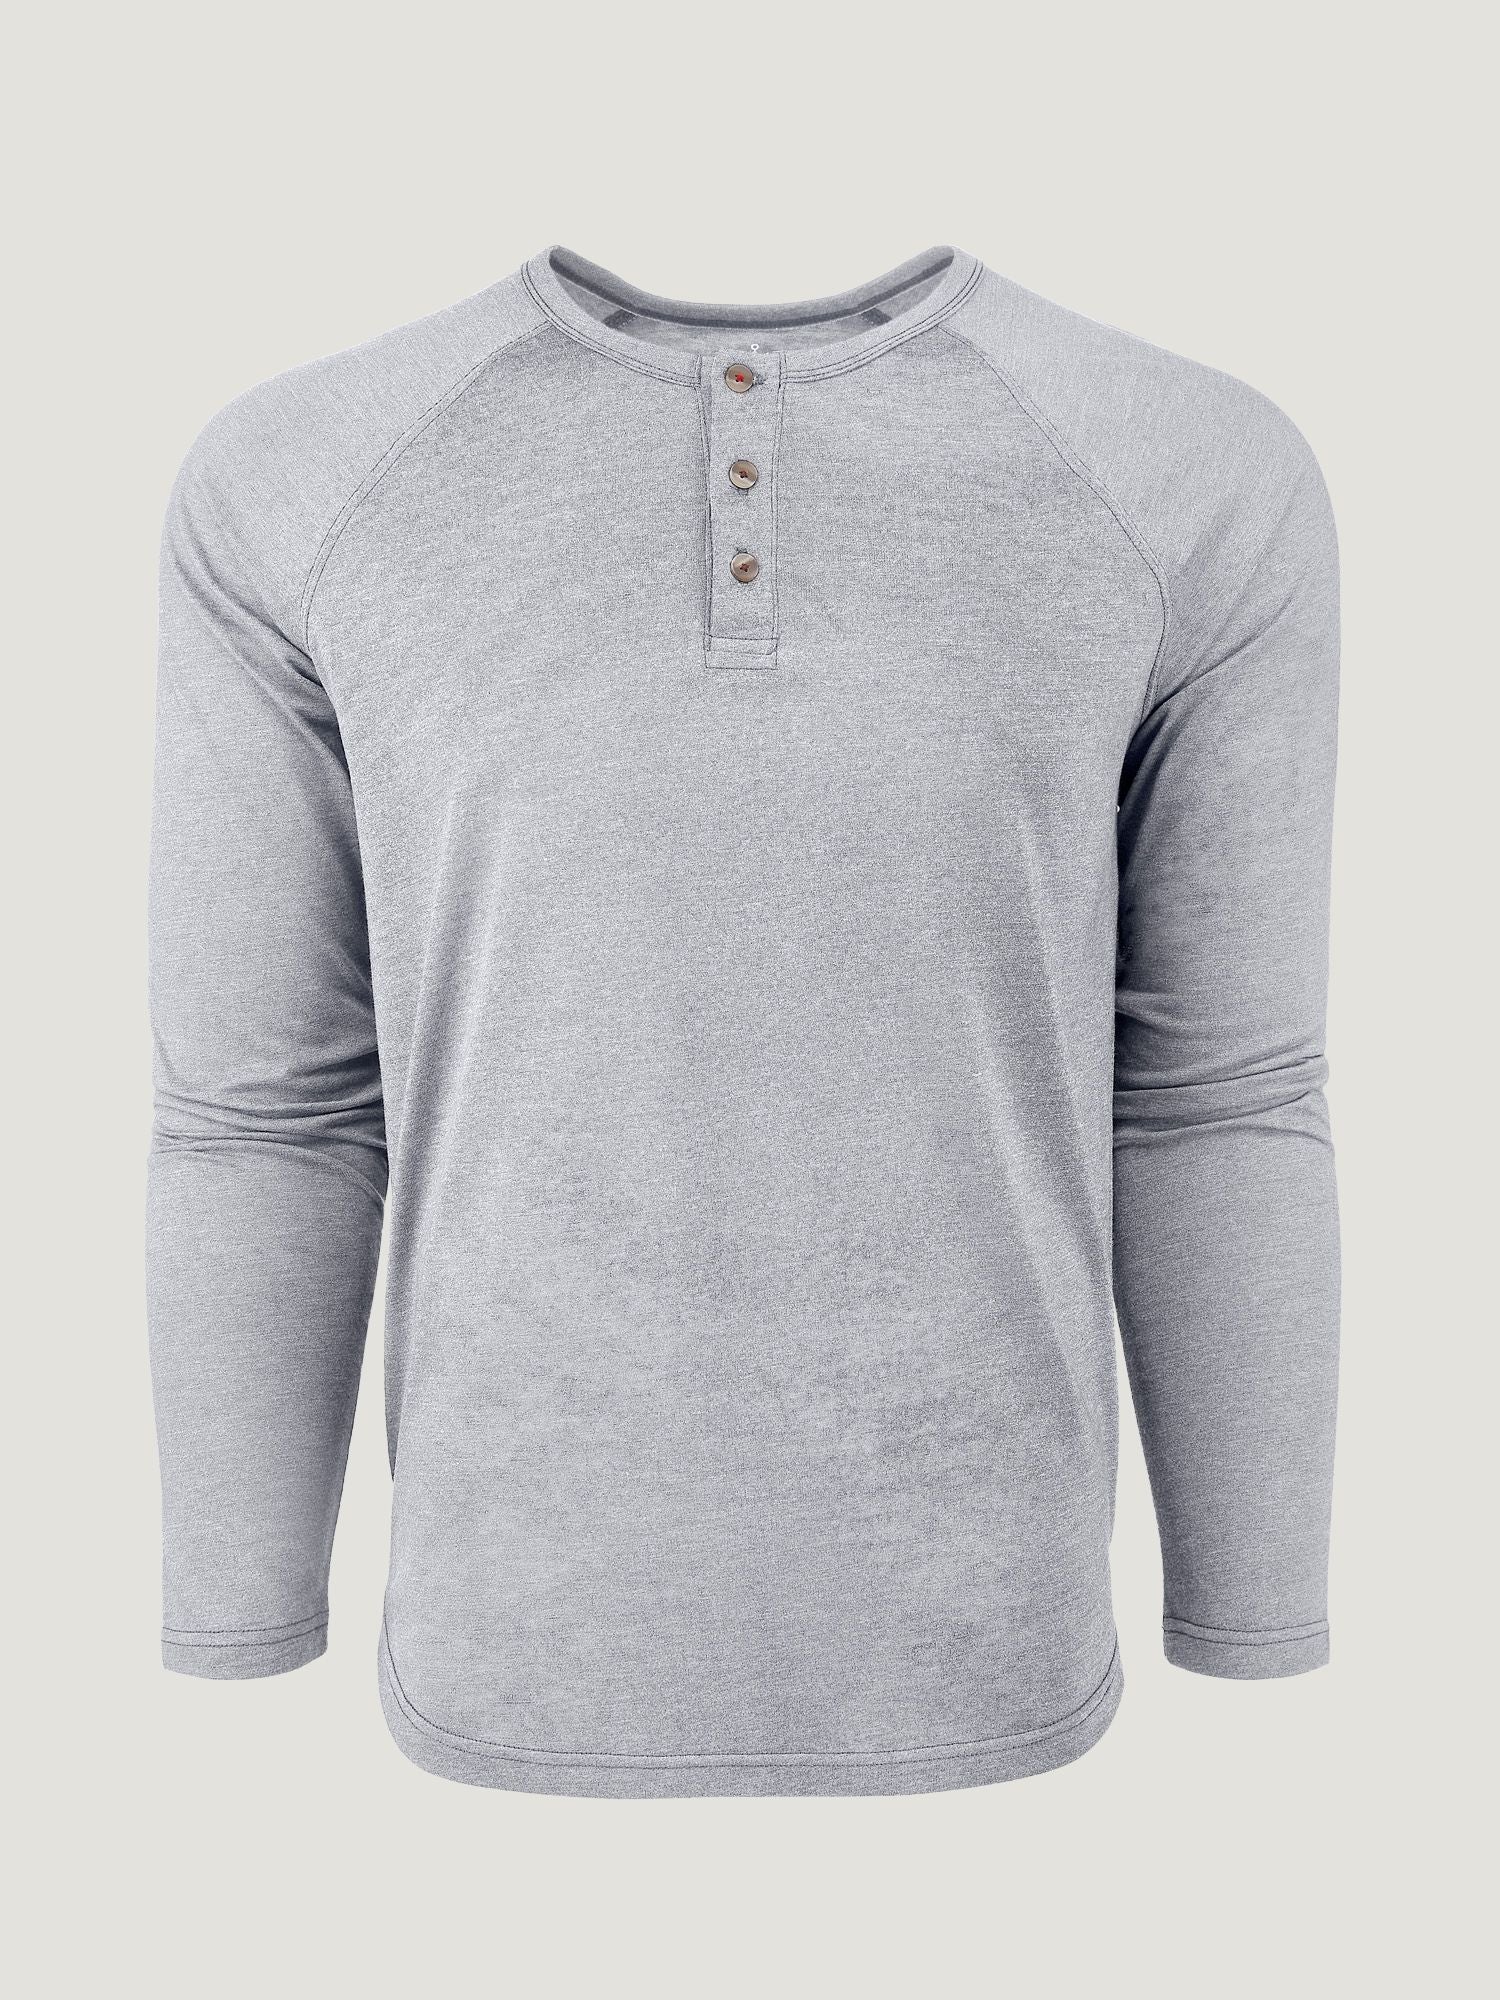 Slim Fit Vintage Henley Shirt for Men - Long Sleeve Button Up V-Neck  Lightweight Tee - Casual and Stylish